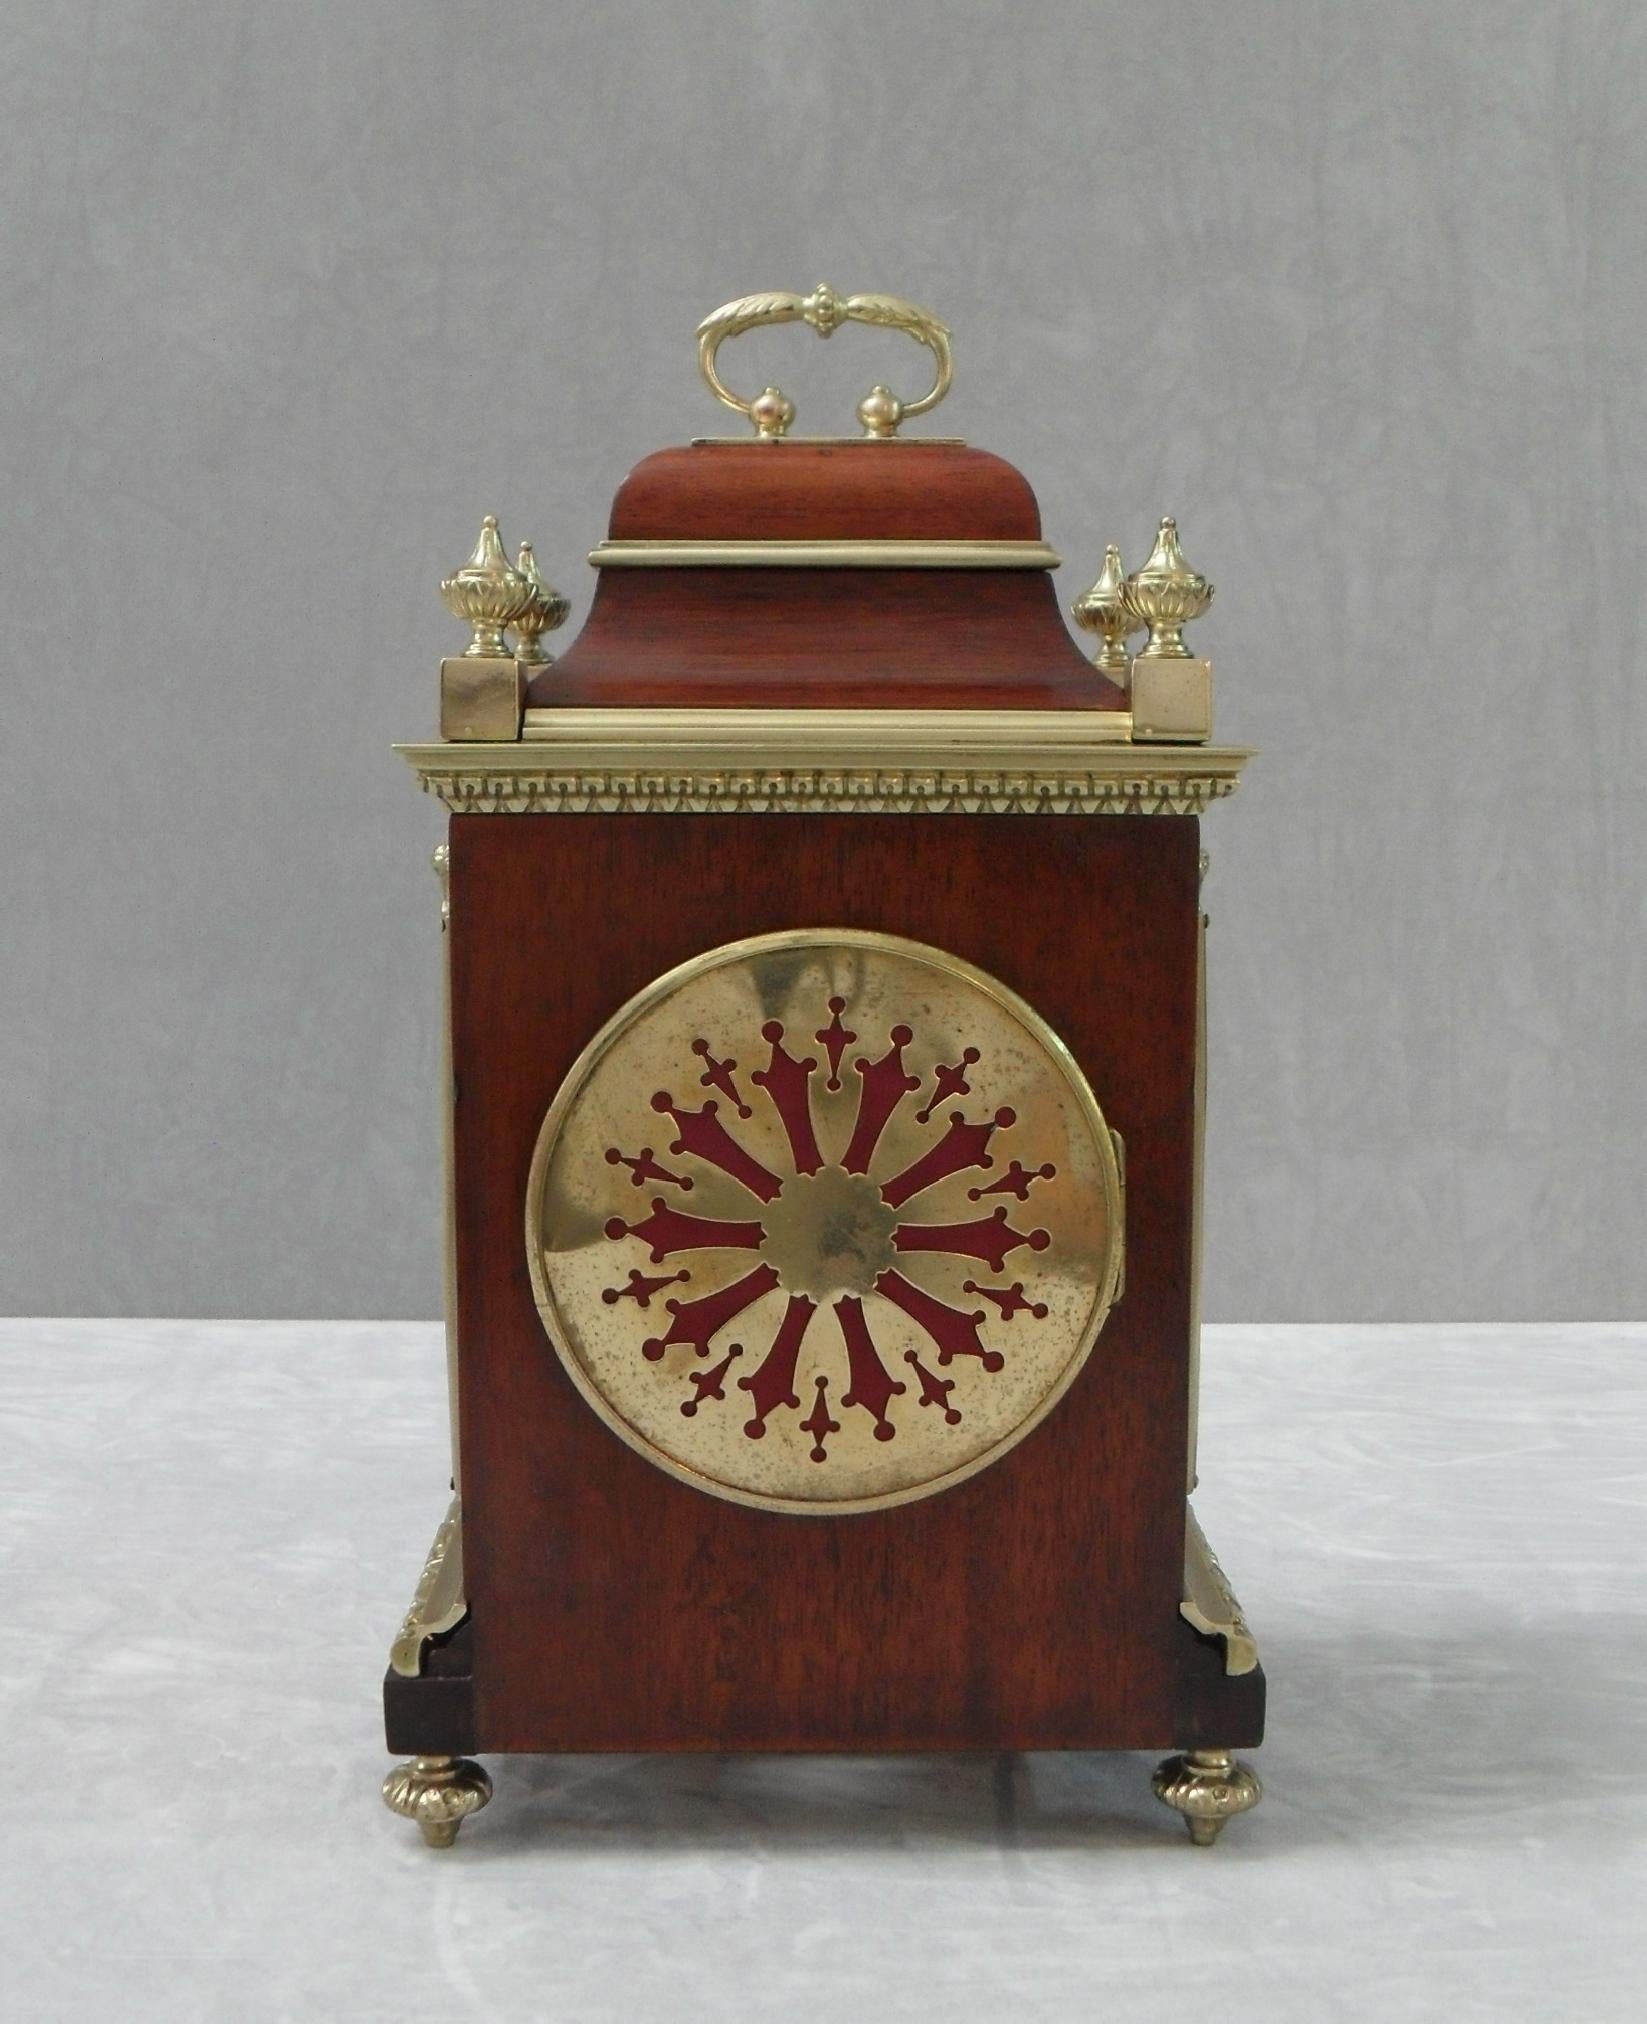 French Belle Epoque Mahogany Mantel Clock with Side Viewing Windows 1